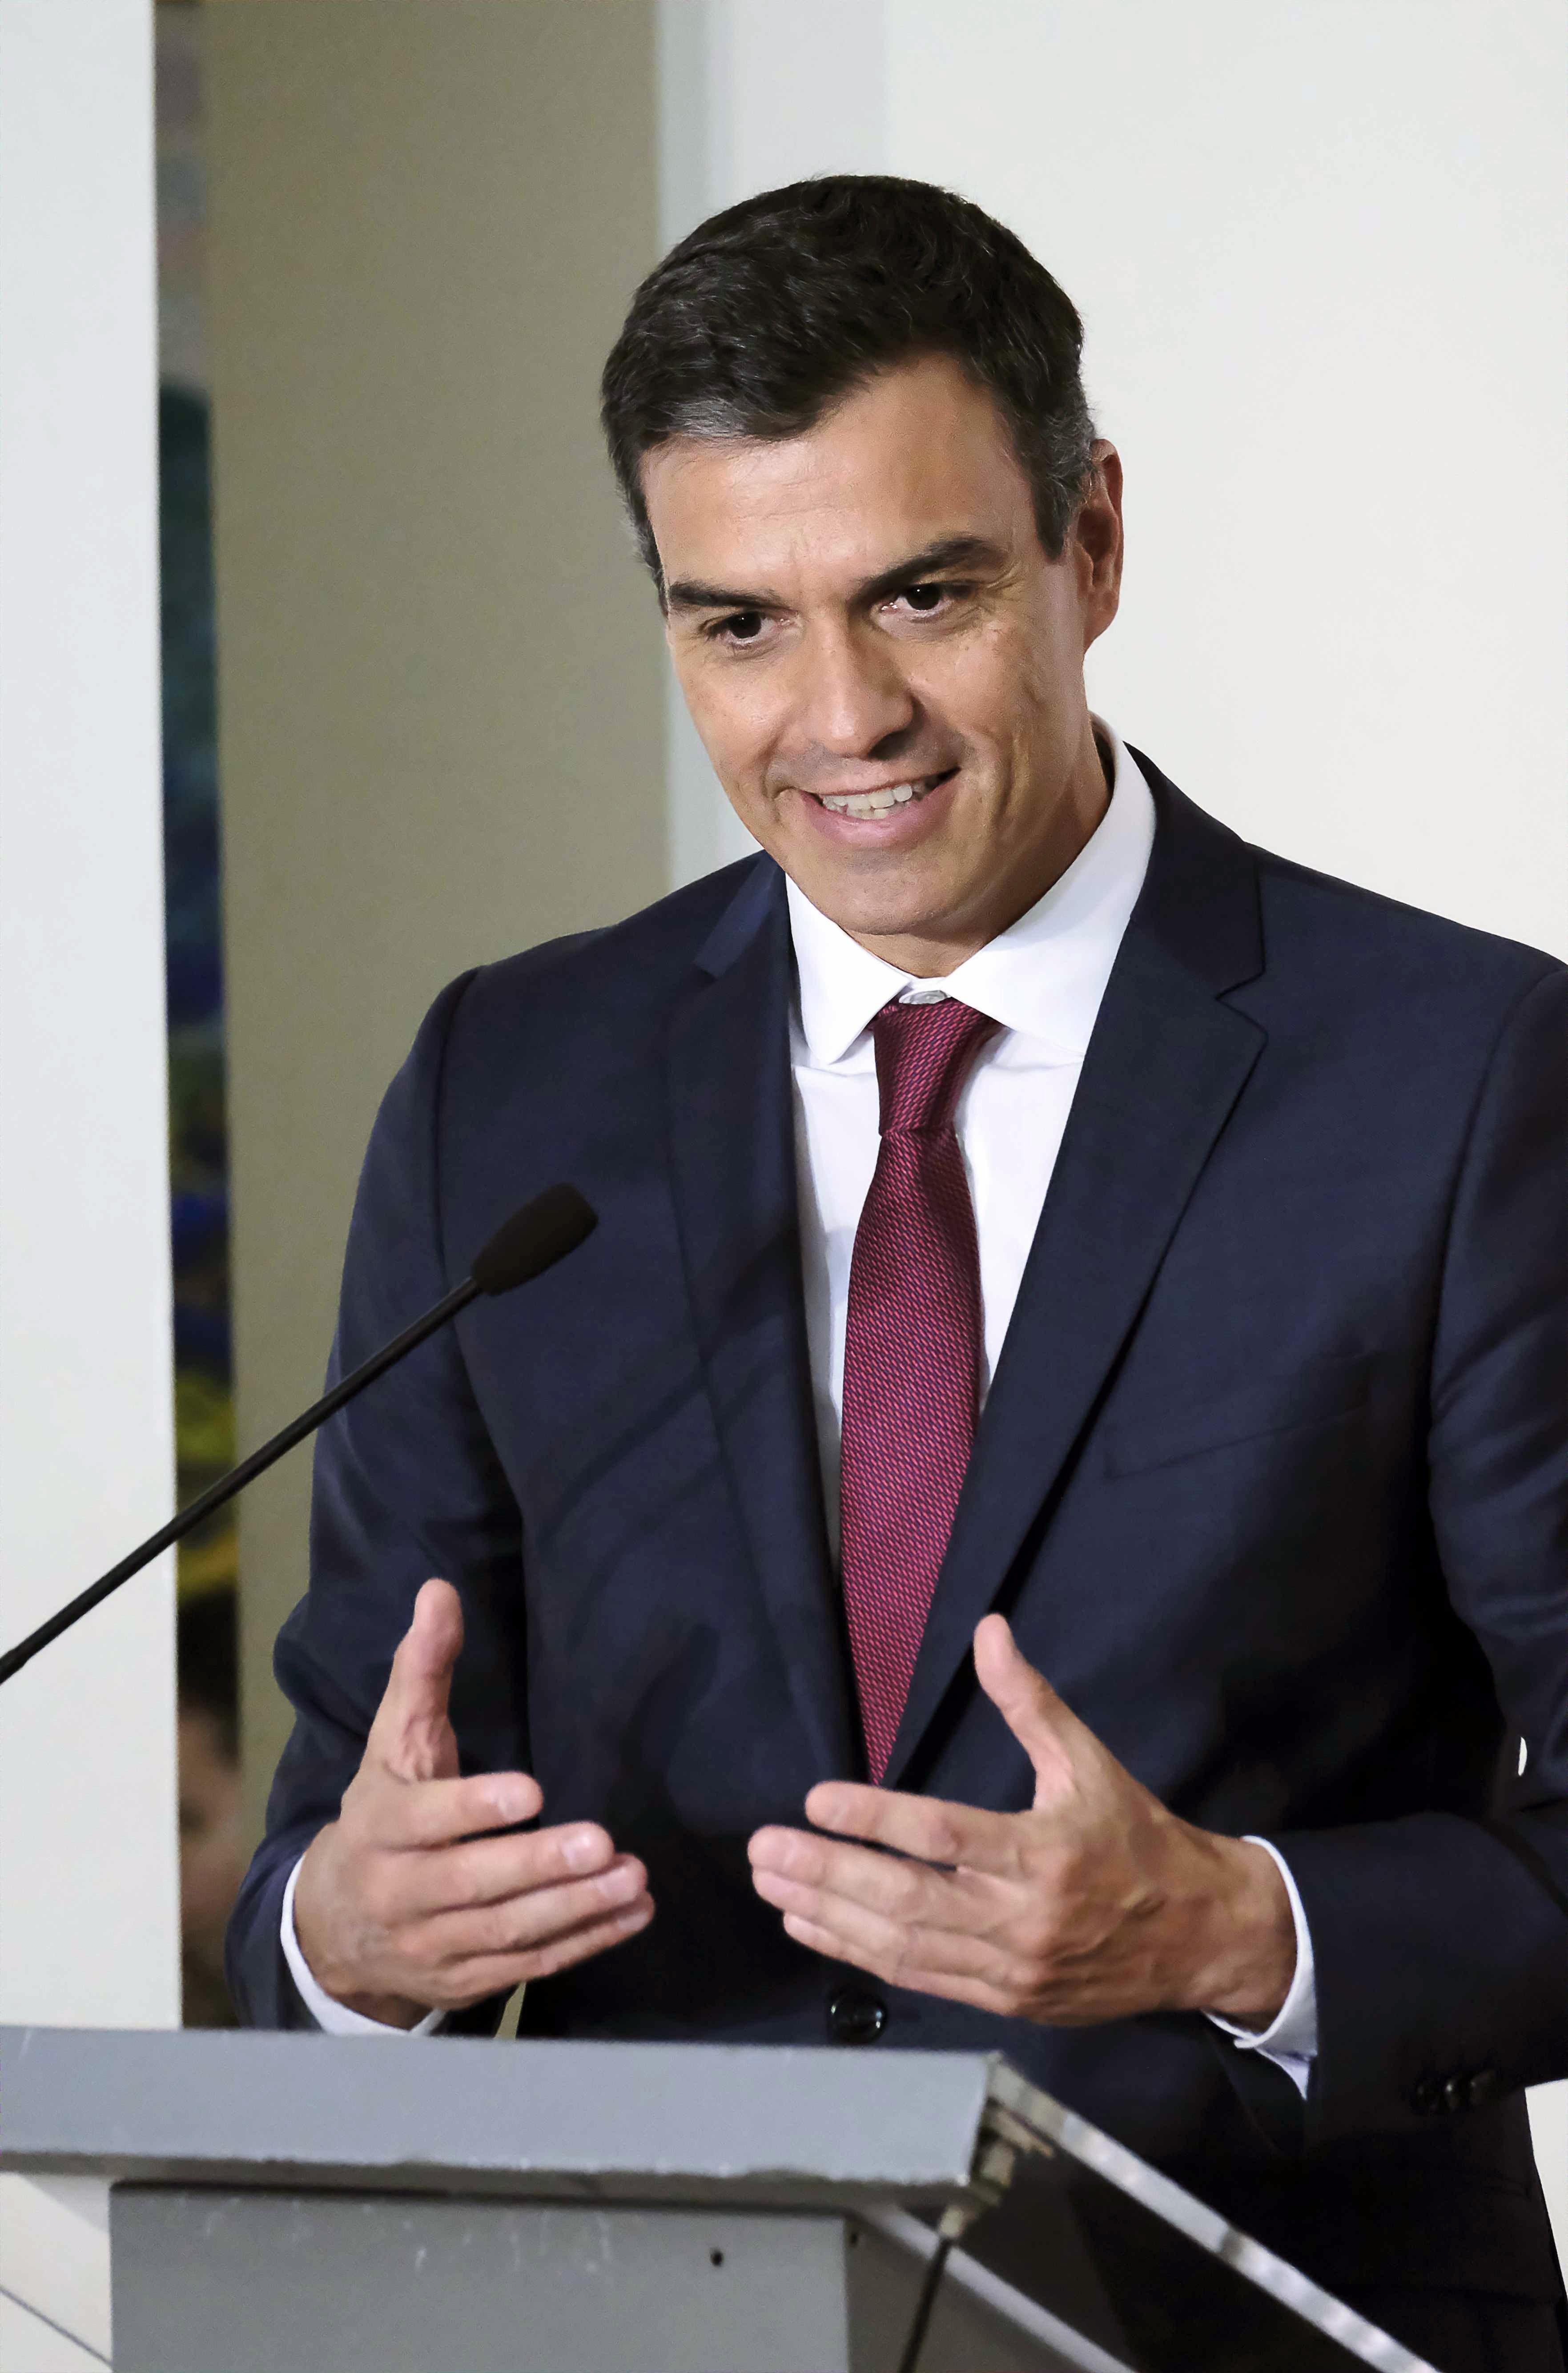 Sánchez proposes a "referendum on self-government, not self-determination" for Catalonia